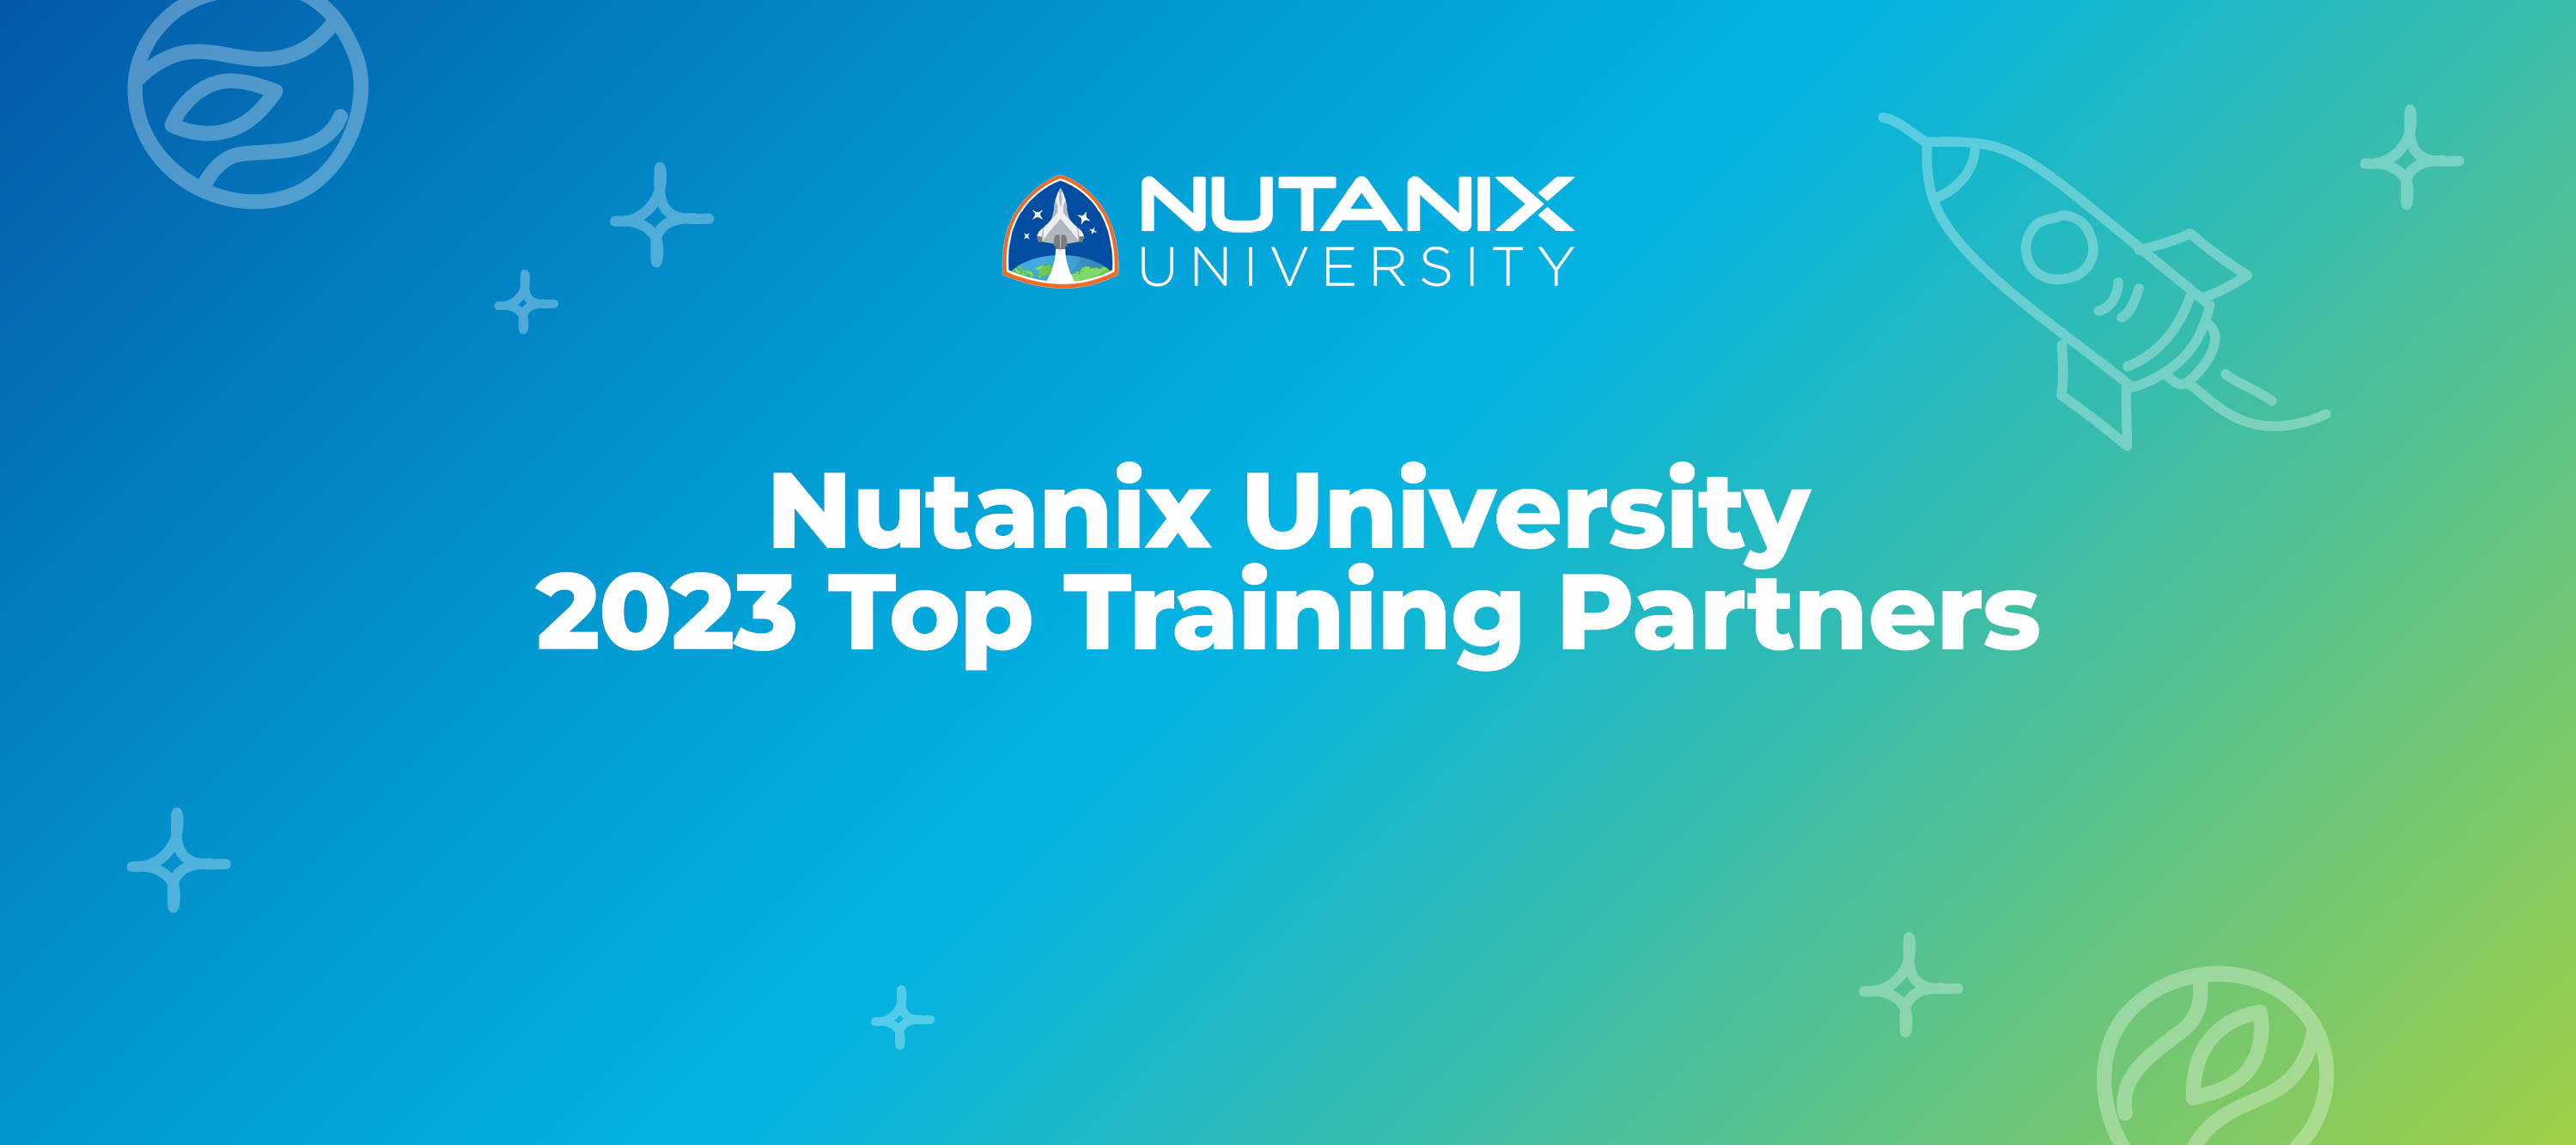 Announcing our Top Training Partners for 2023